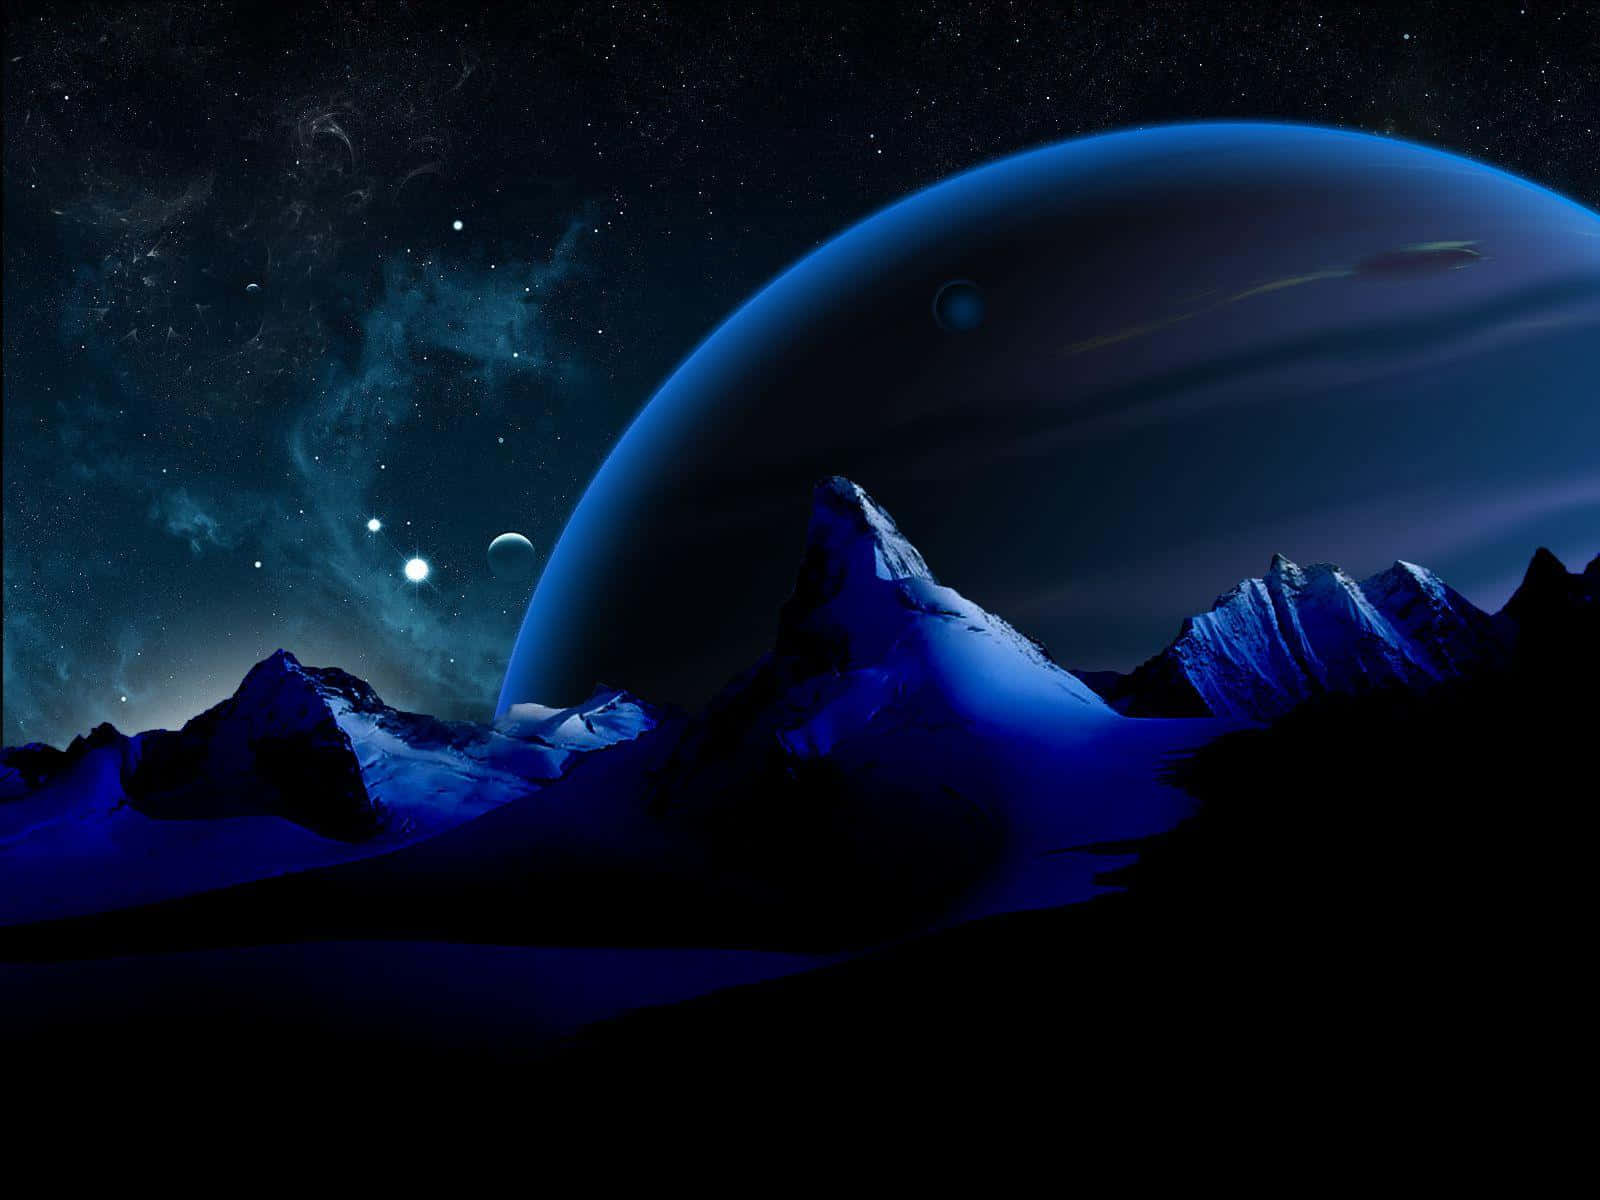 Marvel at the beauty of Neptune – the eighth planet from the Sun!